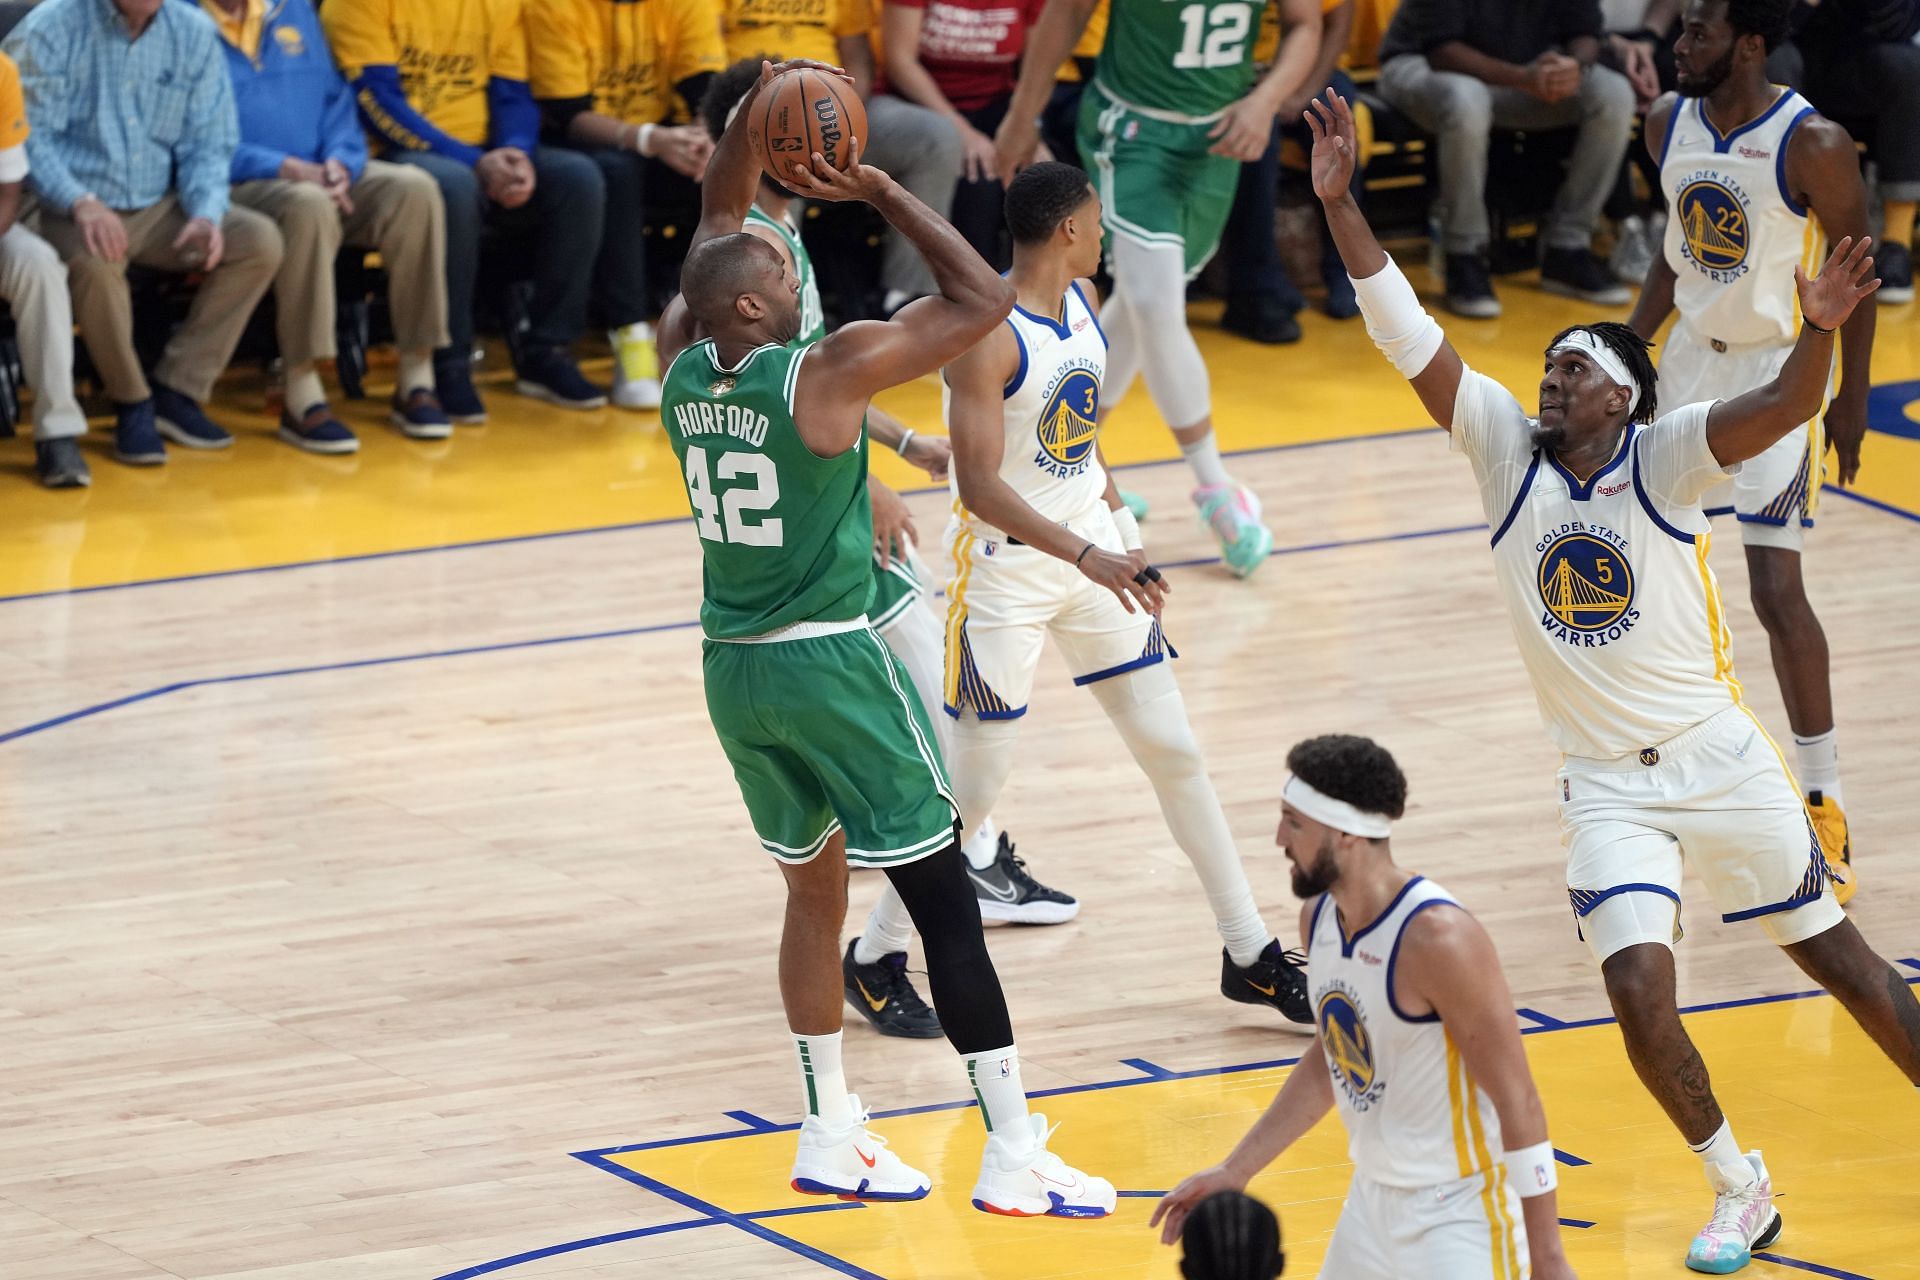 2022 NBA Finals - Game One between the Warriors and the Celtics